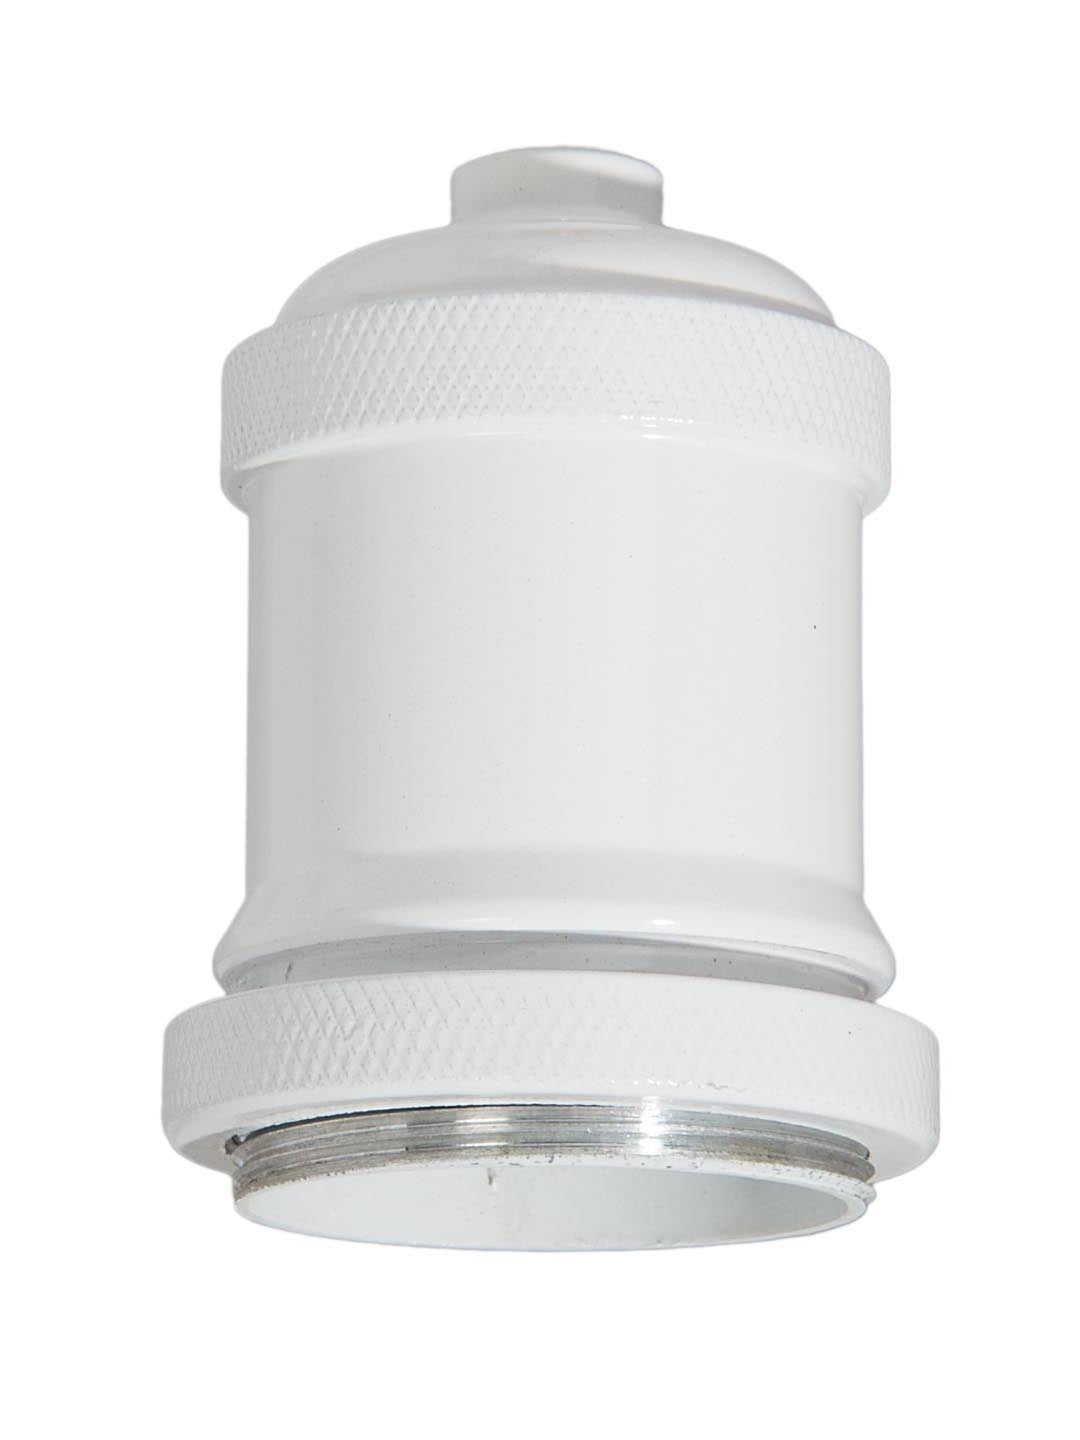 Glossy White Finish Die Cast Aluminum E-26 Socket Cover with E-26 Socket and Mounting Hardware